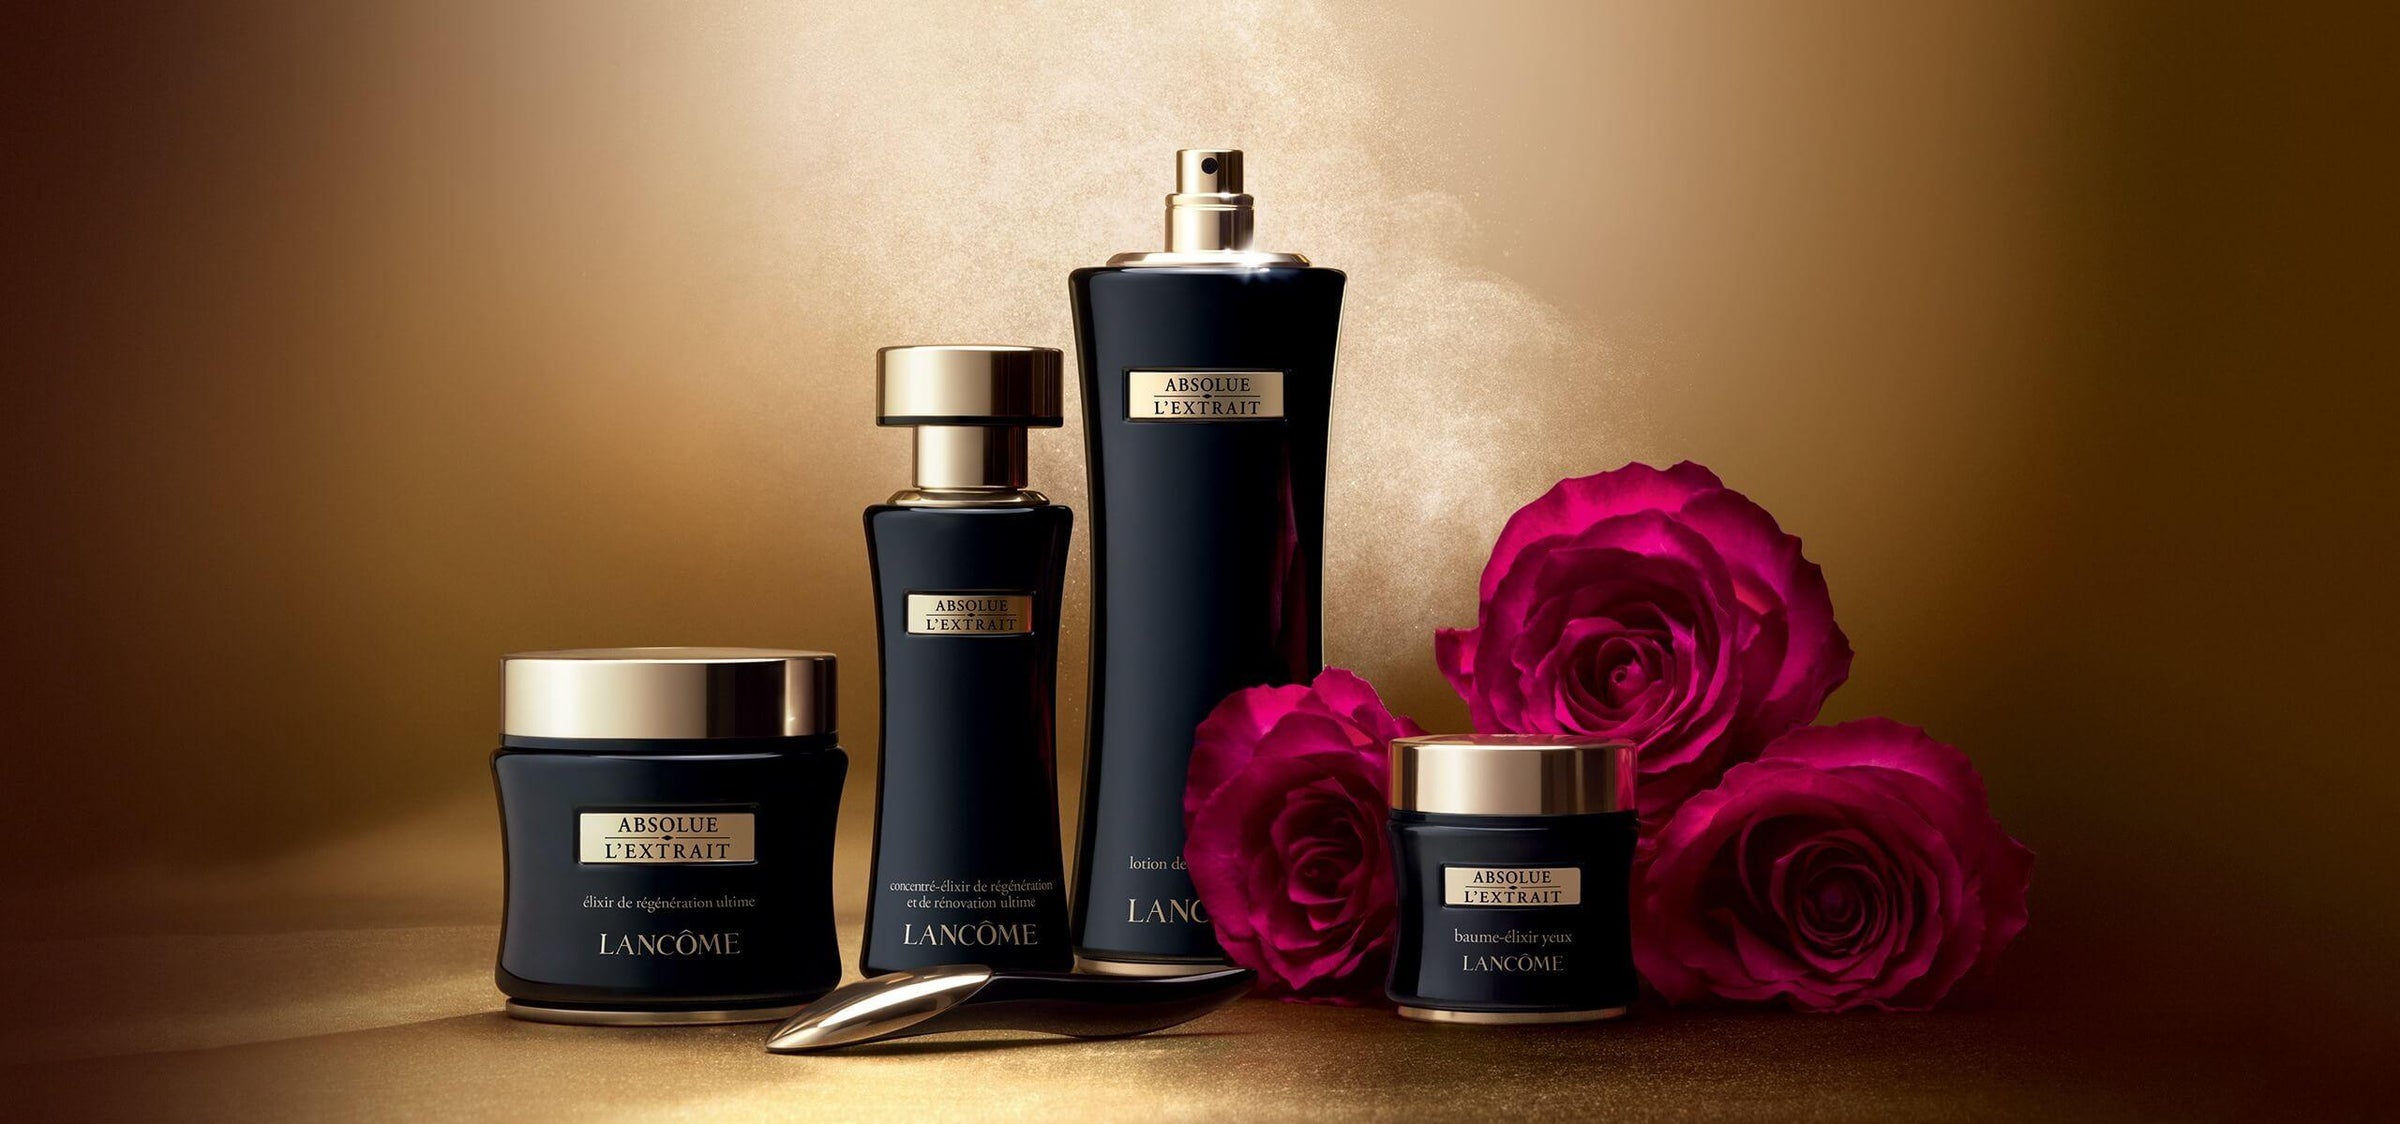 Absolue L'Extrait - Ascent Luxury Cosmetics